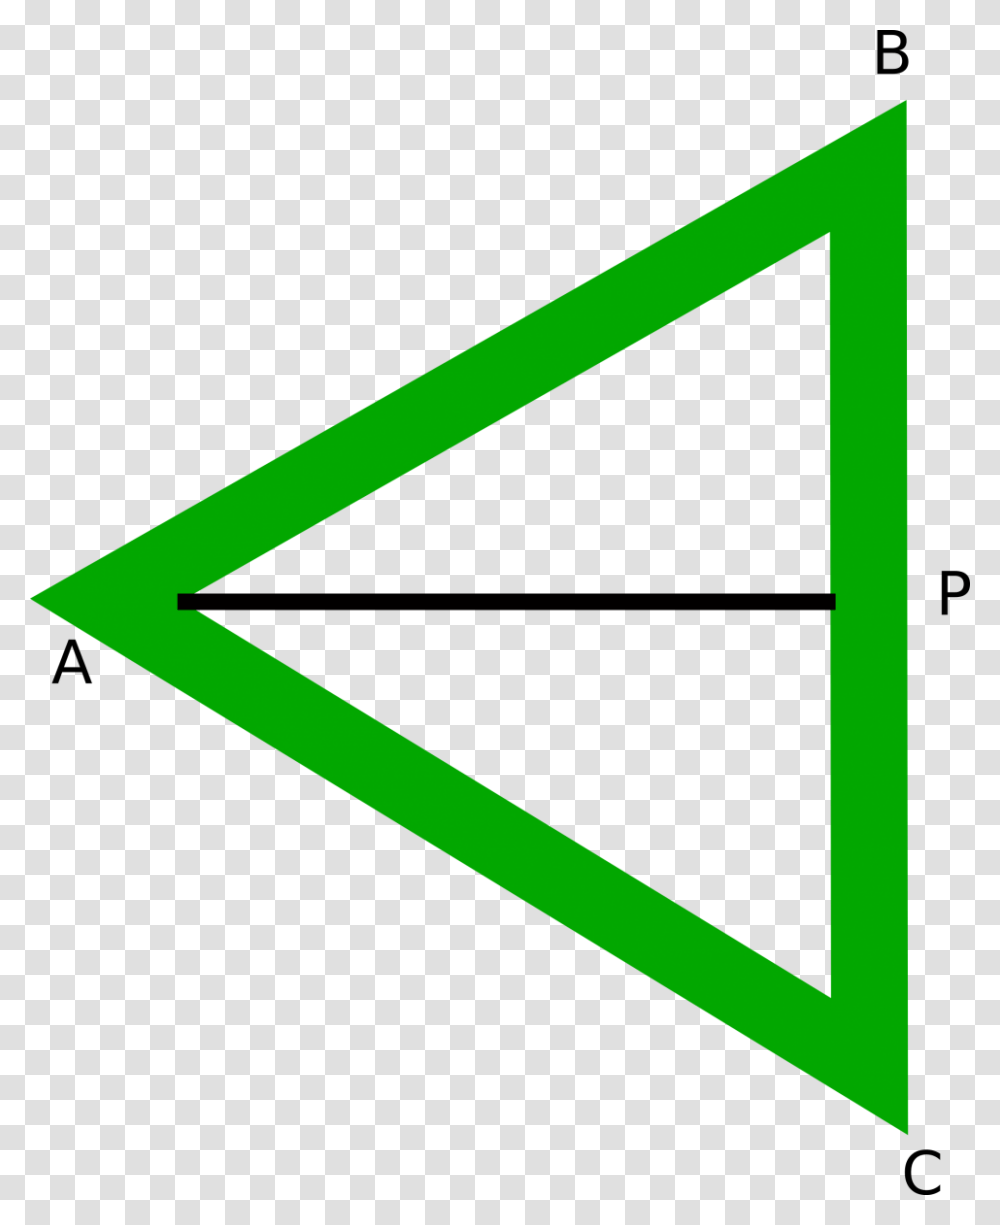 Triangular Ring Is Made Of Three Identical Uniform, Triangle, Axe, Tool Transparent Png